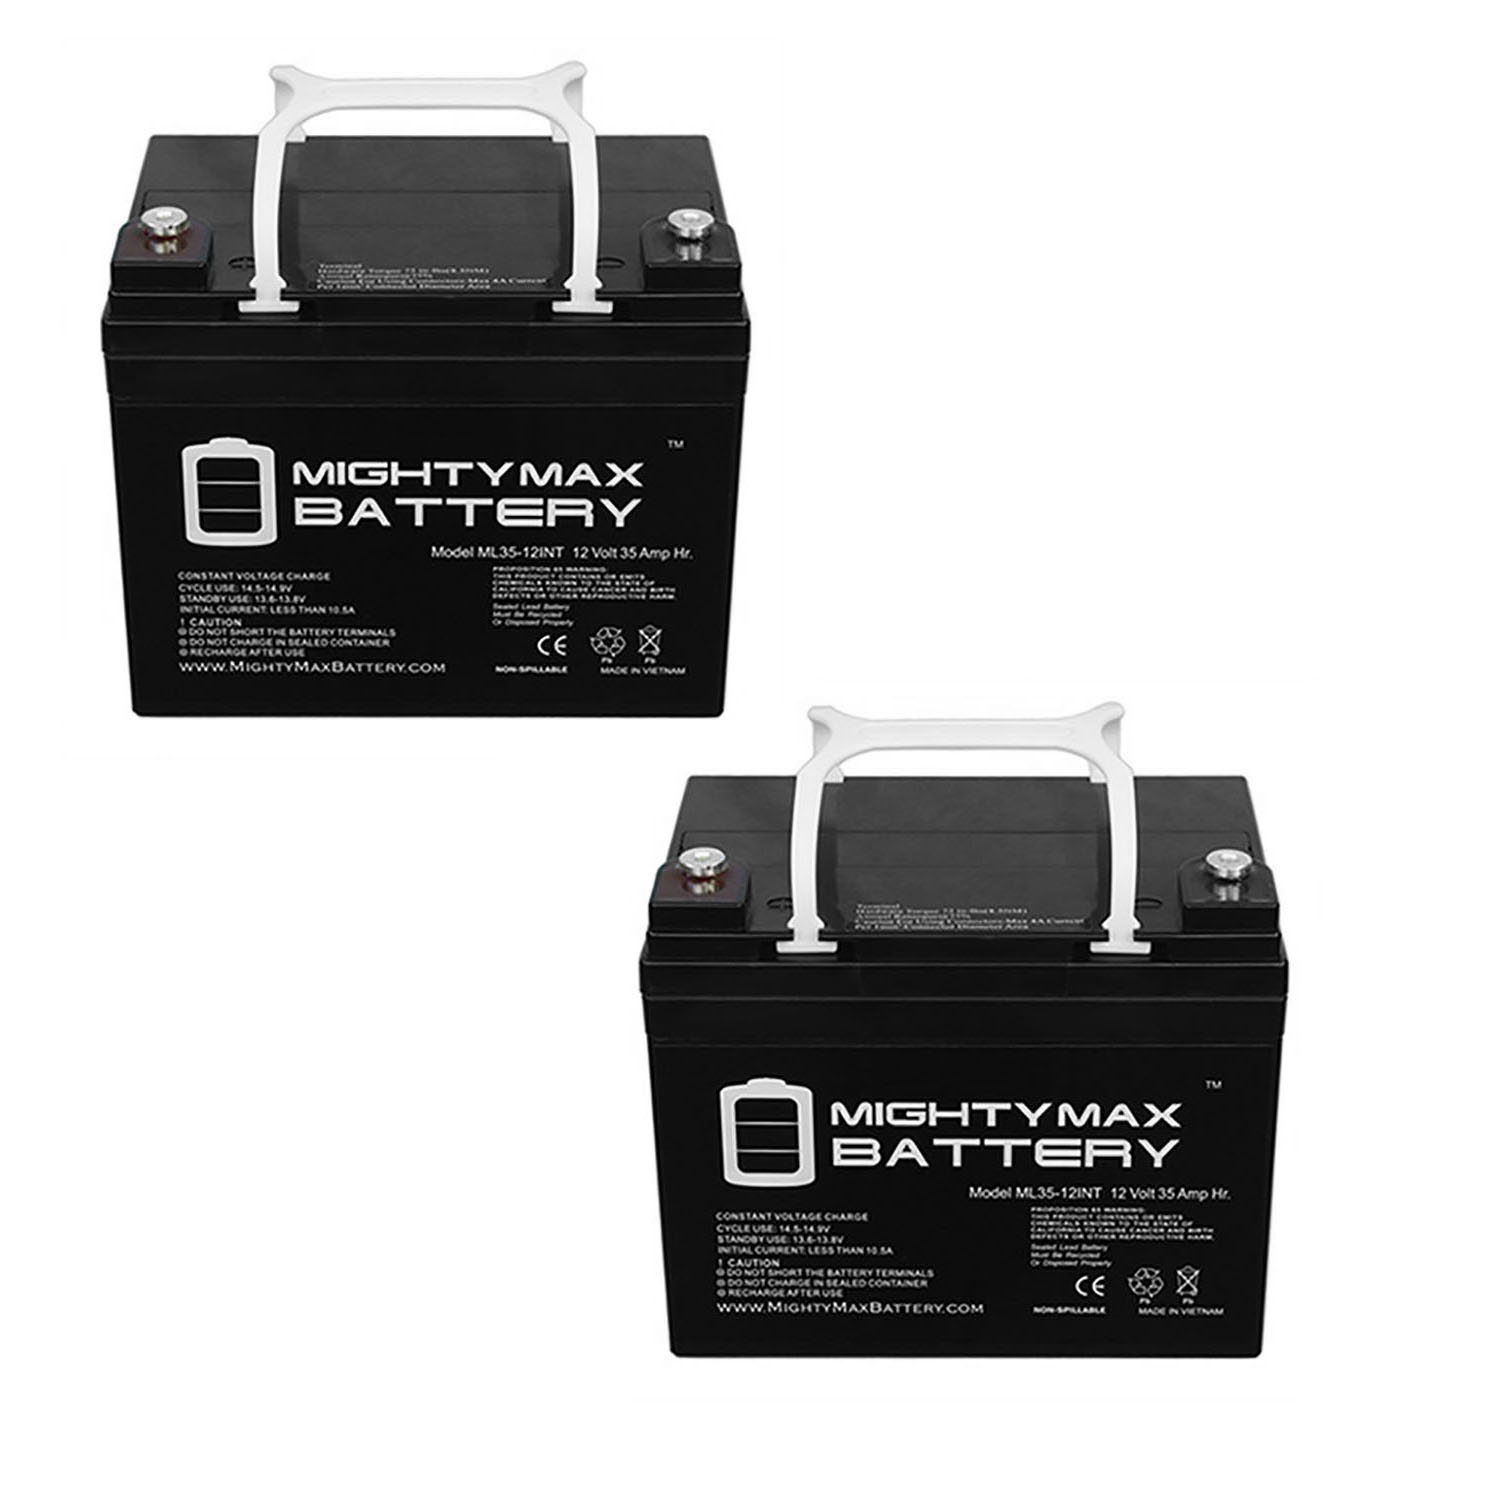 12V 35AH INT Replacement Battery for Encore 36K 250 - 2 Pack